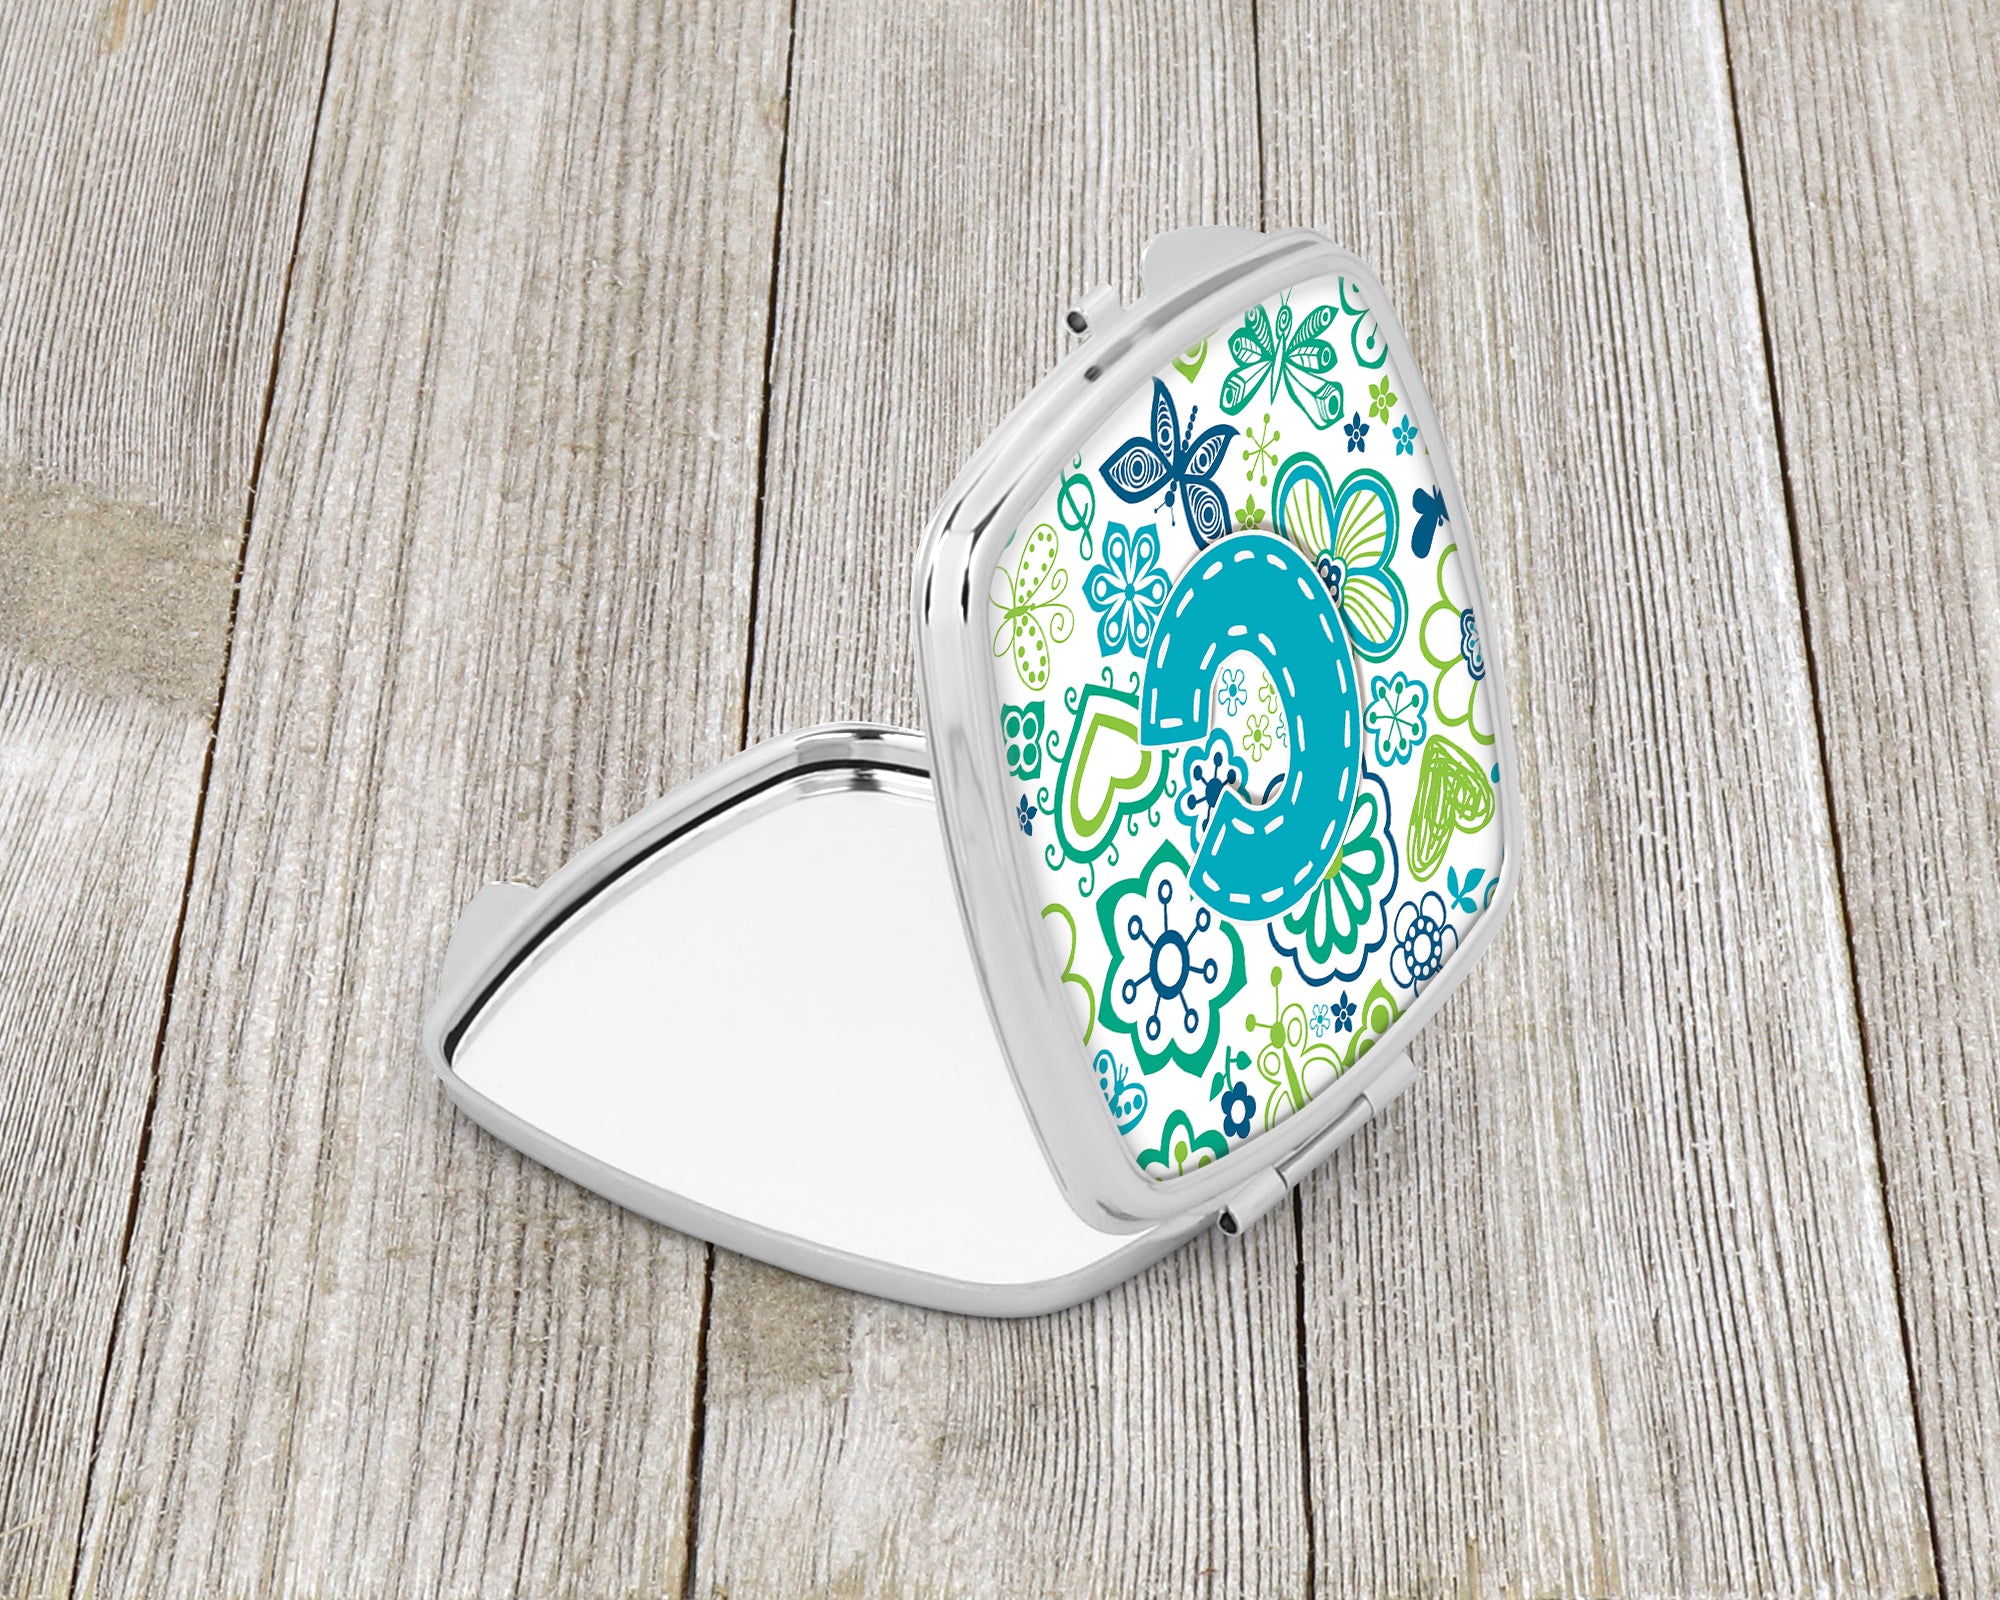 Letter C Flowers and Butterflies Teal Blue Compact Mirror CJ2006-CSCM  the-store.com.